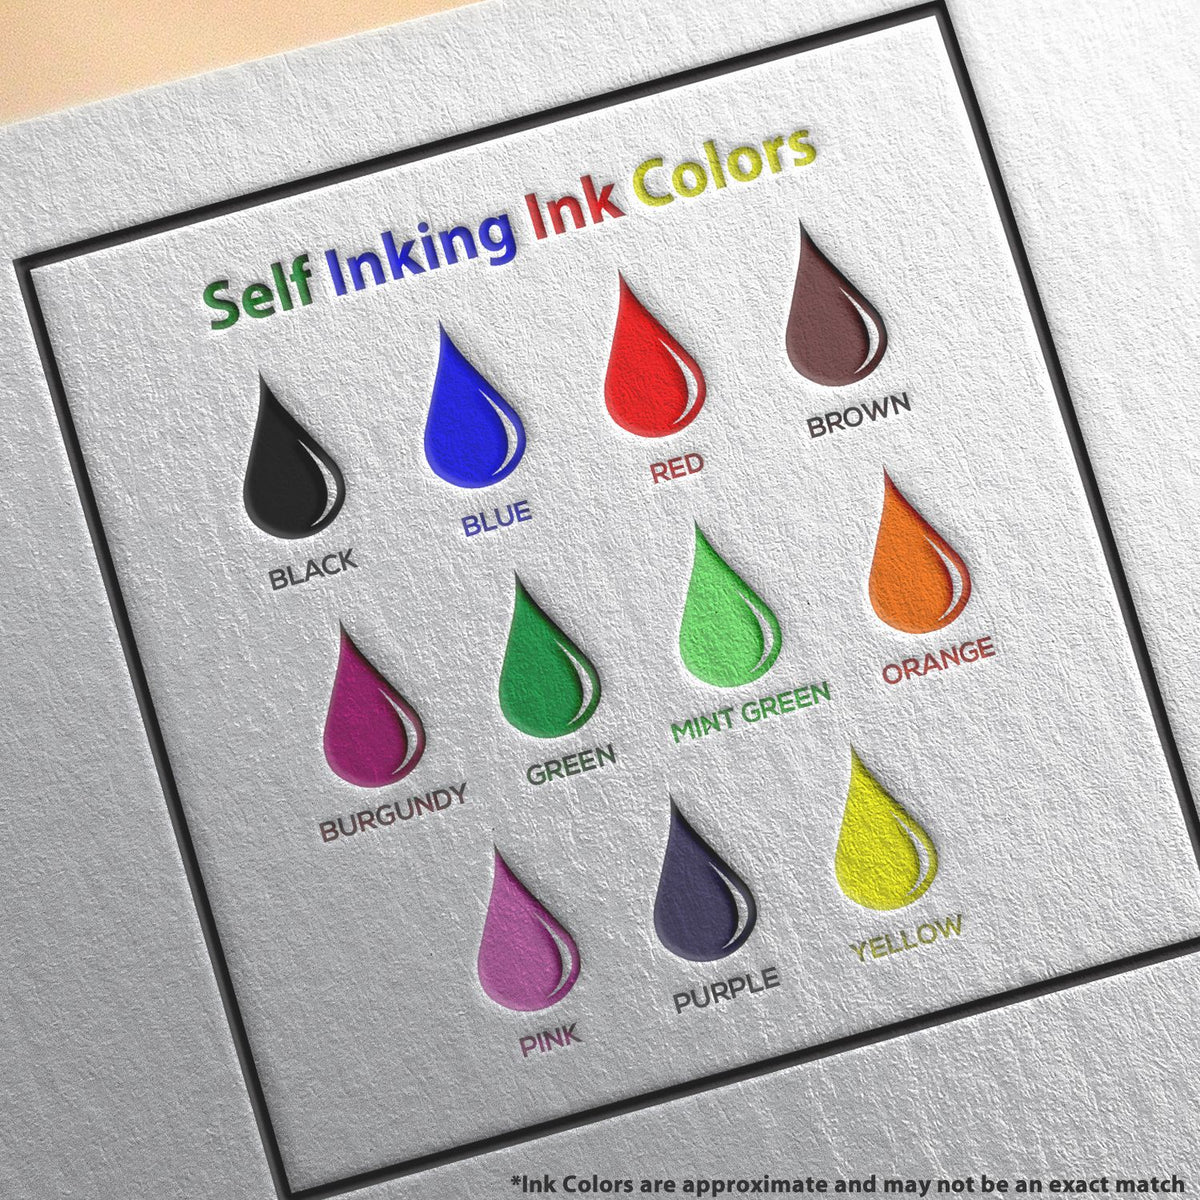 A picture showing the different ink colors or hues available for the Self-Inking Virginia PE Stamp product.